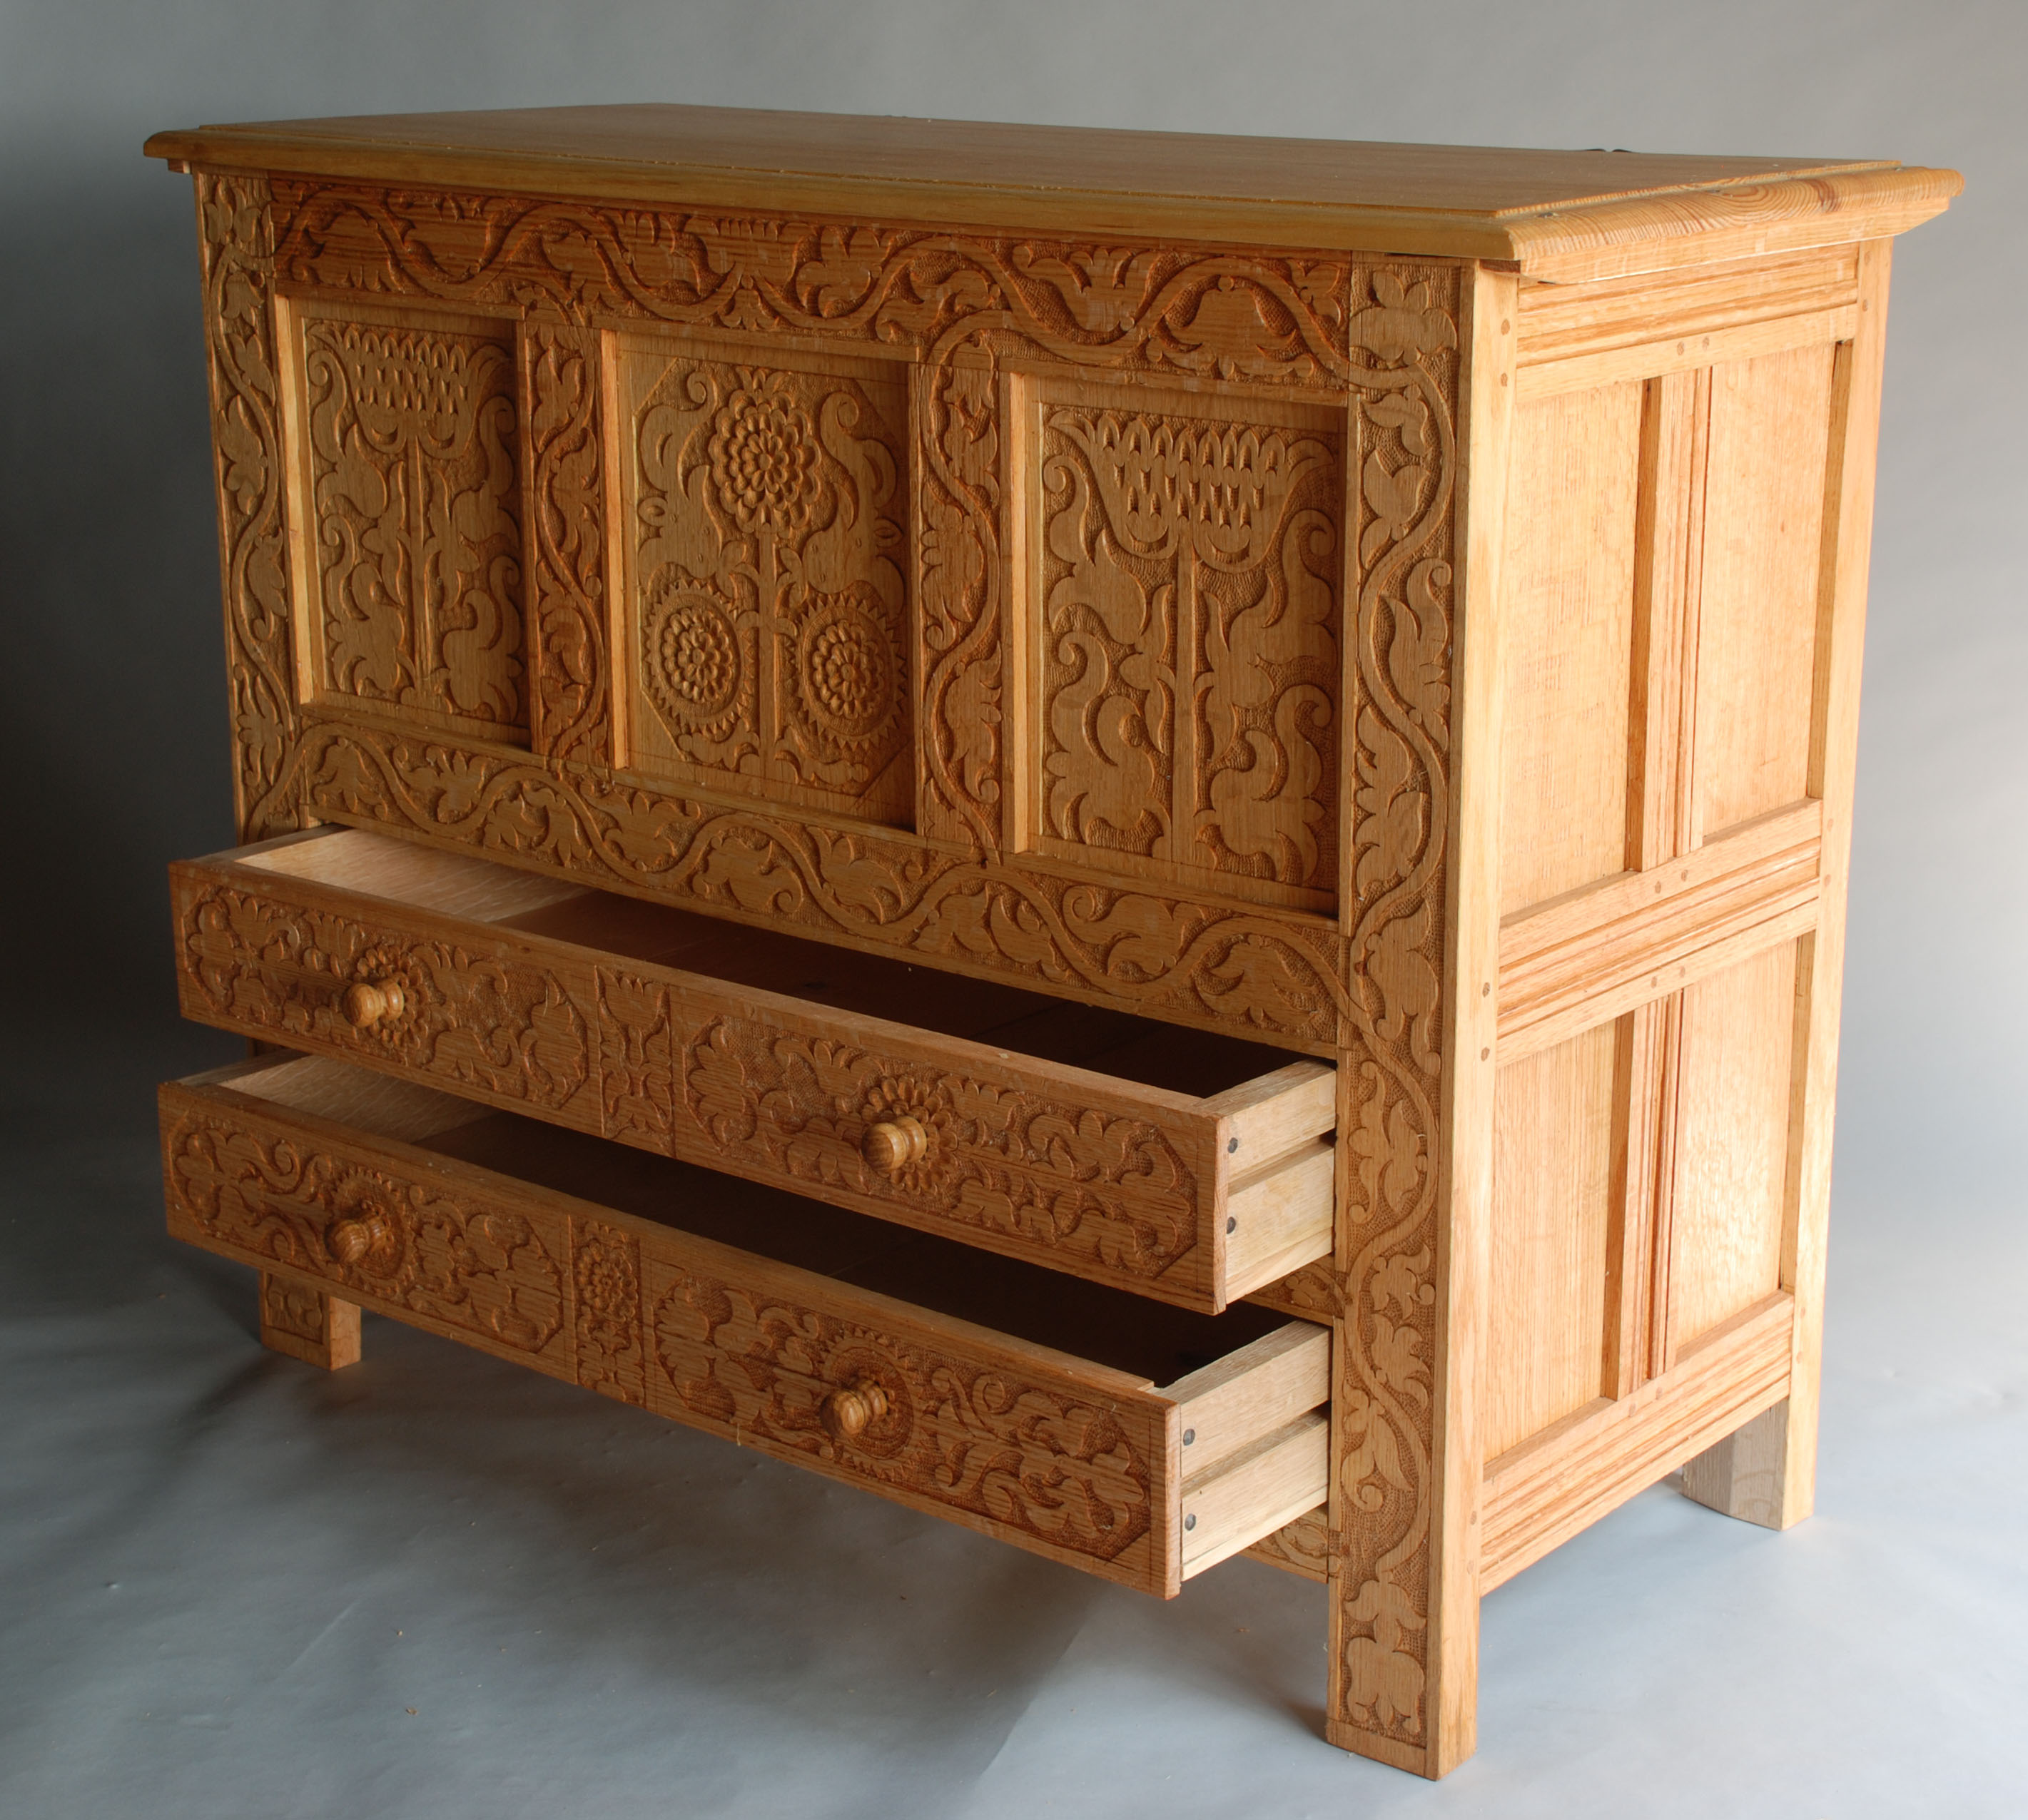 carved oak chest | Peter Follansbee, joiner's notes